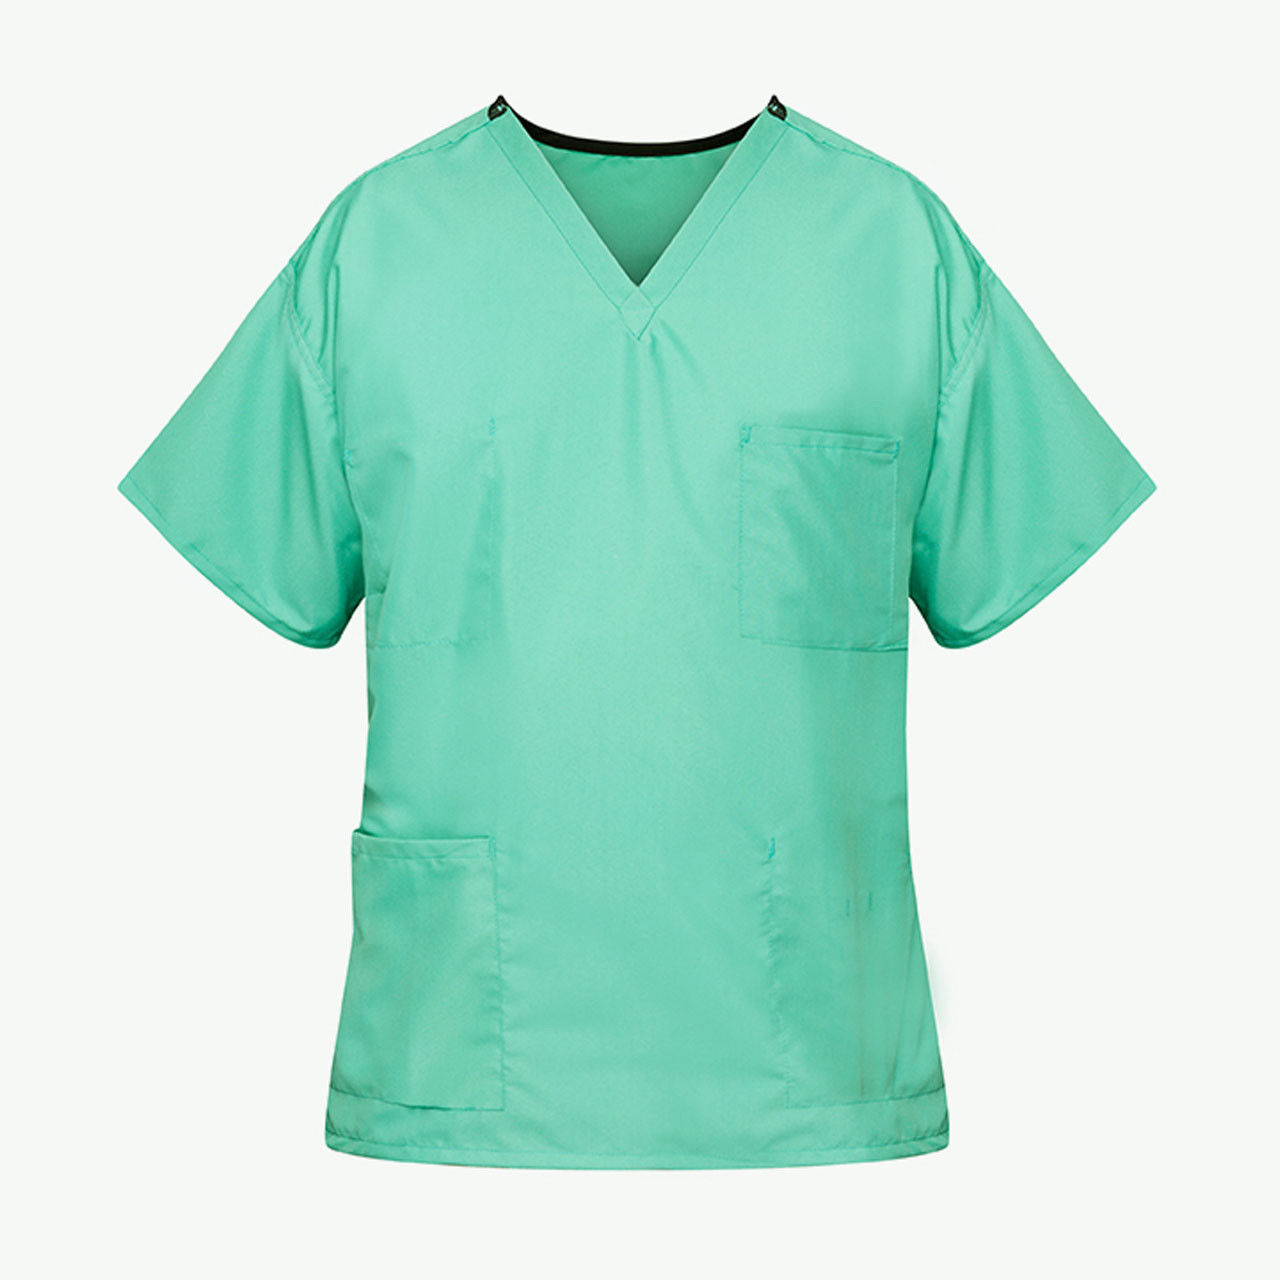 Which pockets are included on the jade green scrubs?